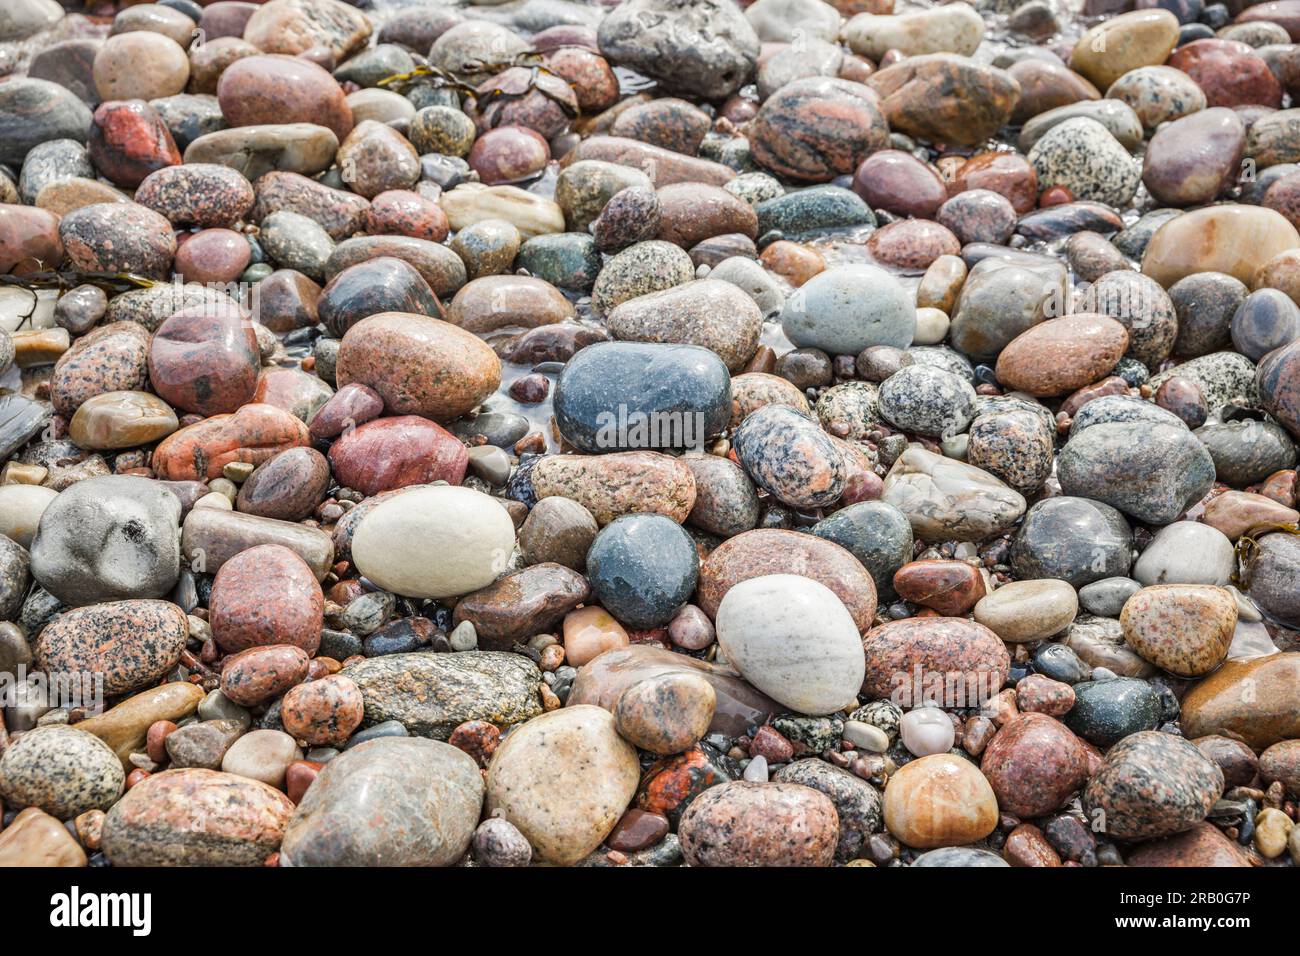 Colorful stones on a pebble beach Stock Photo